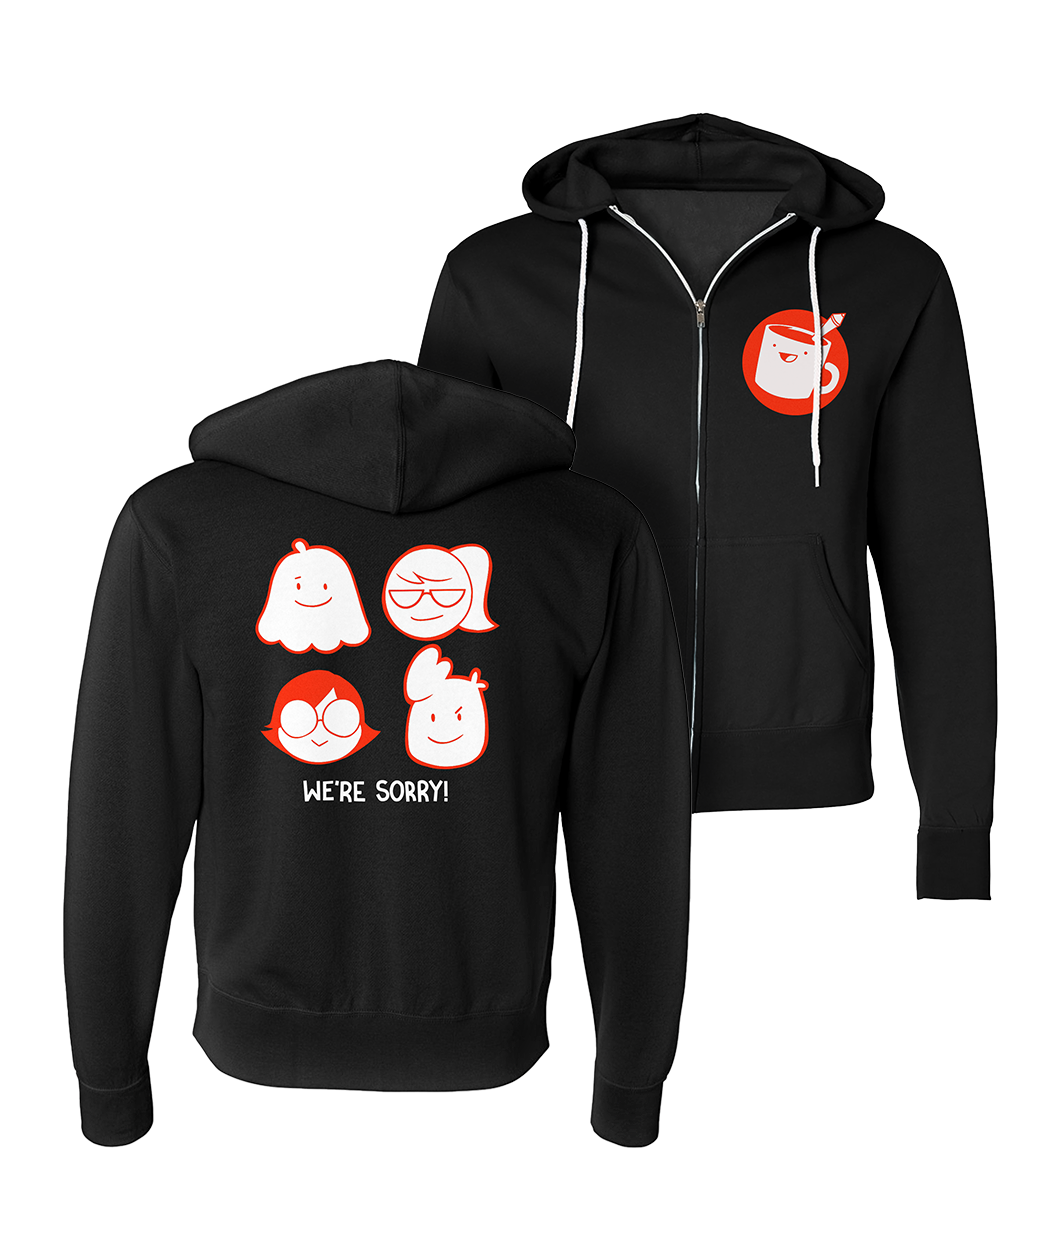 A black zip-up hoodie with the Drawfee logo on the left breast pocket area. On the back are four different Drawfee icons with the text 